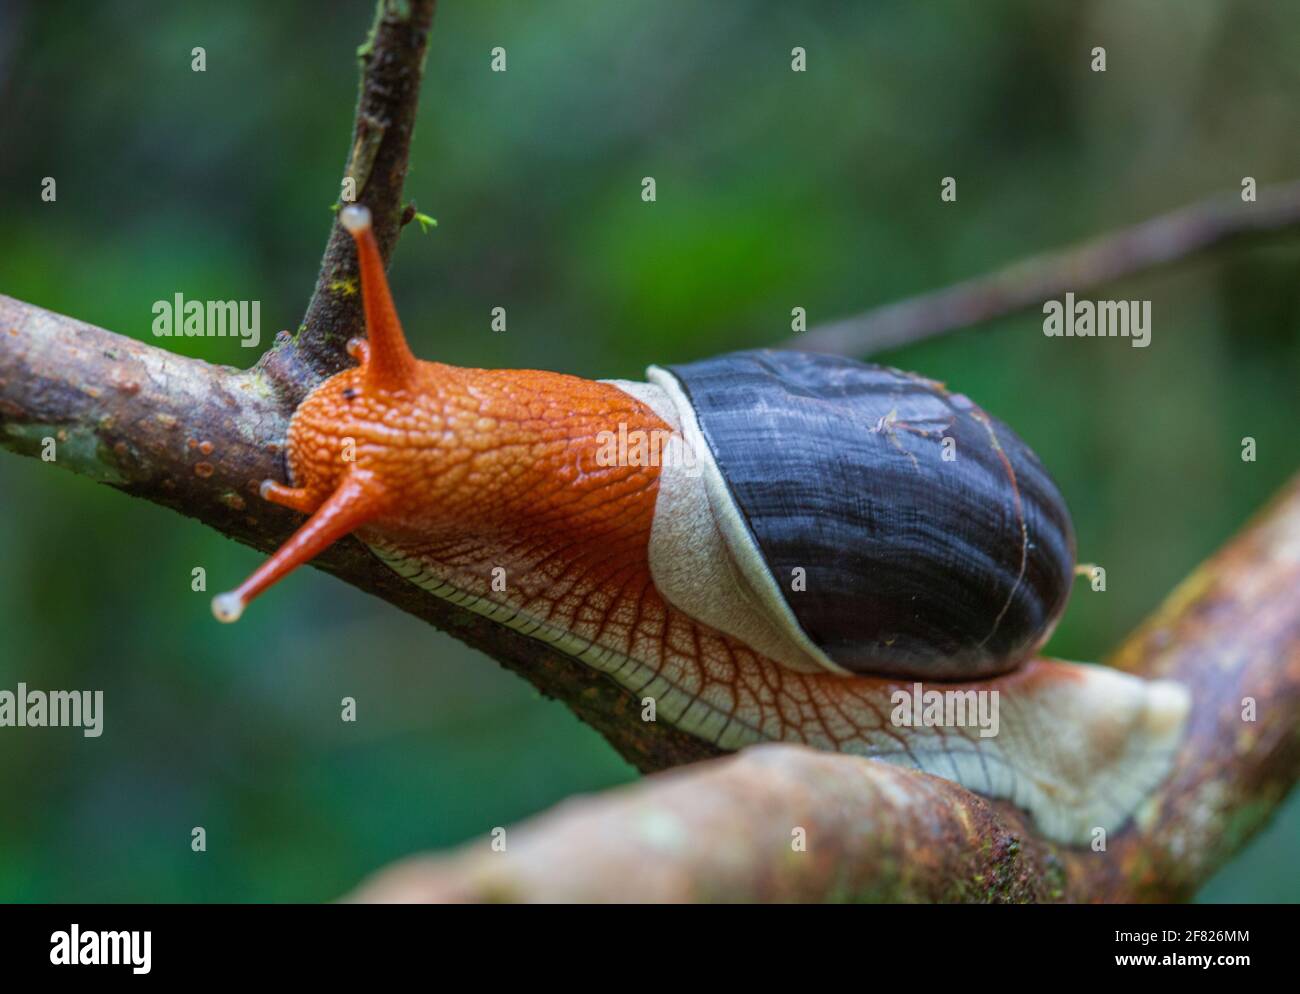 Indrella ampulla - a mollusk endemic to Western Ghats of India - usually found during monsoon. Photographed in Coorg, India. Stock Photo